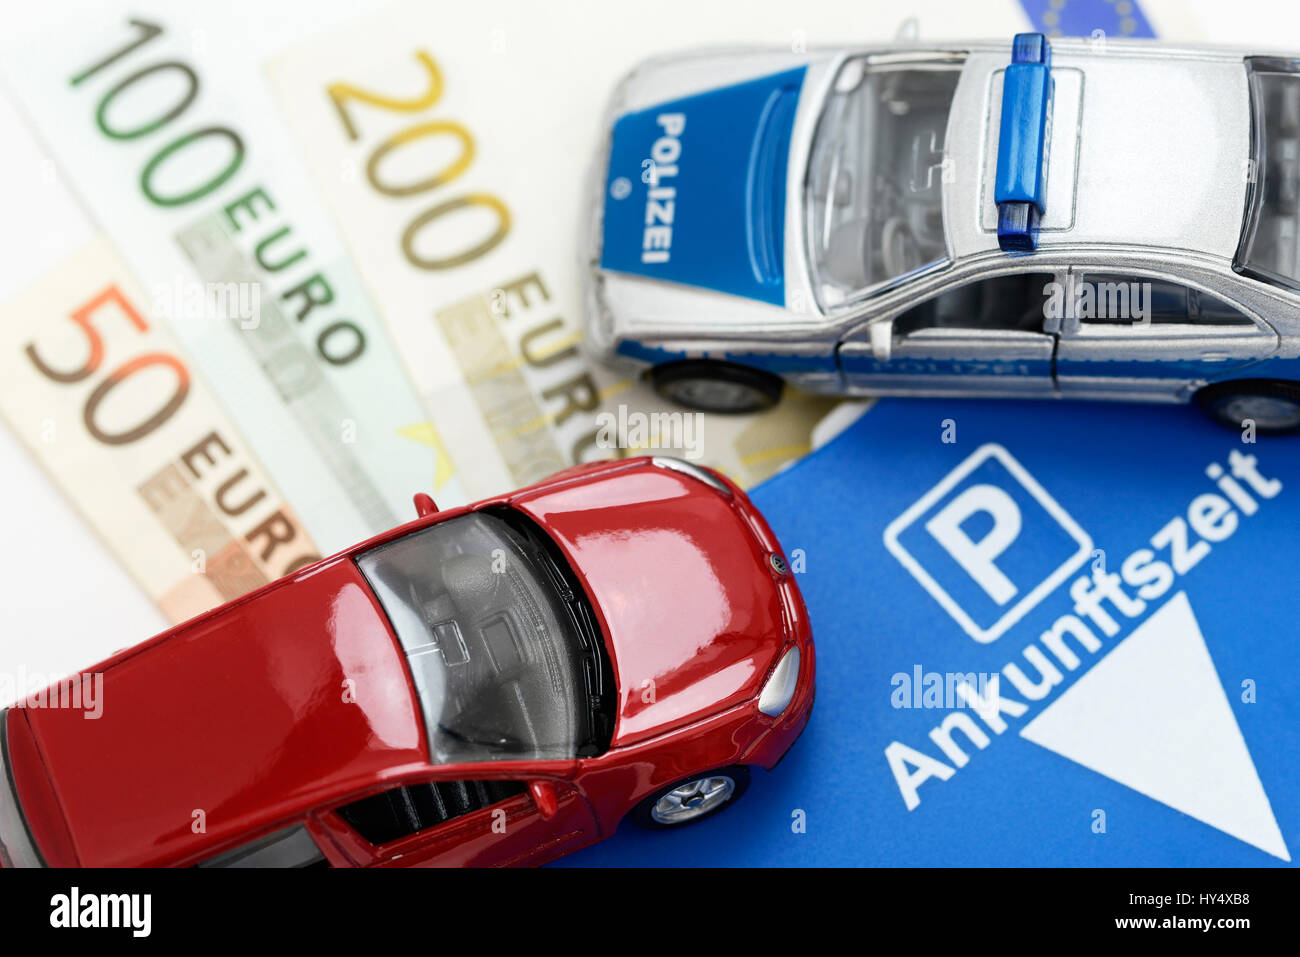 https://c8.alamy.com/comp/HY4XB8/miniature-car-bank-notes-and-parking-disc-higher-punishments-for-falschparker-HY4XB8.jpg